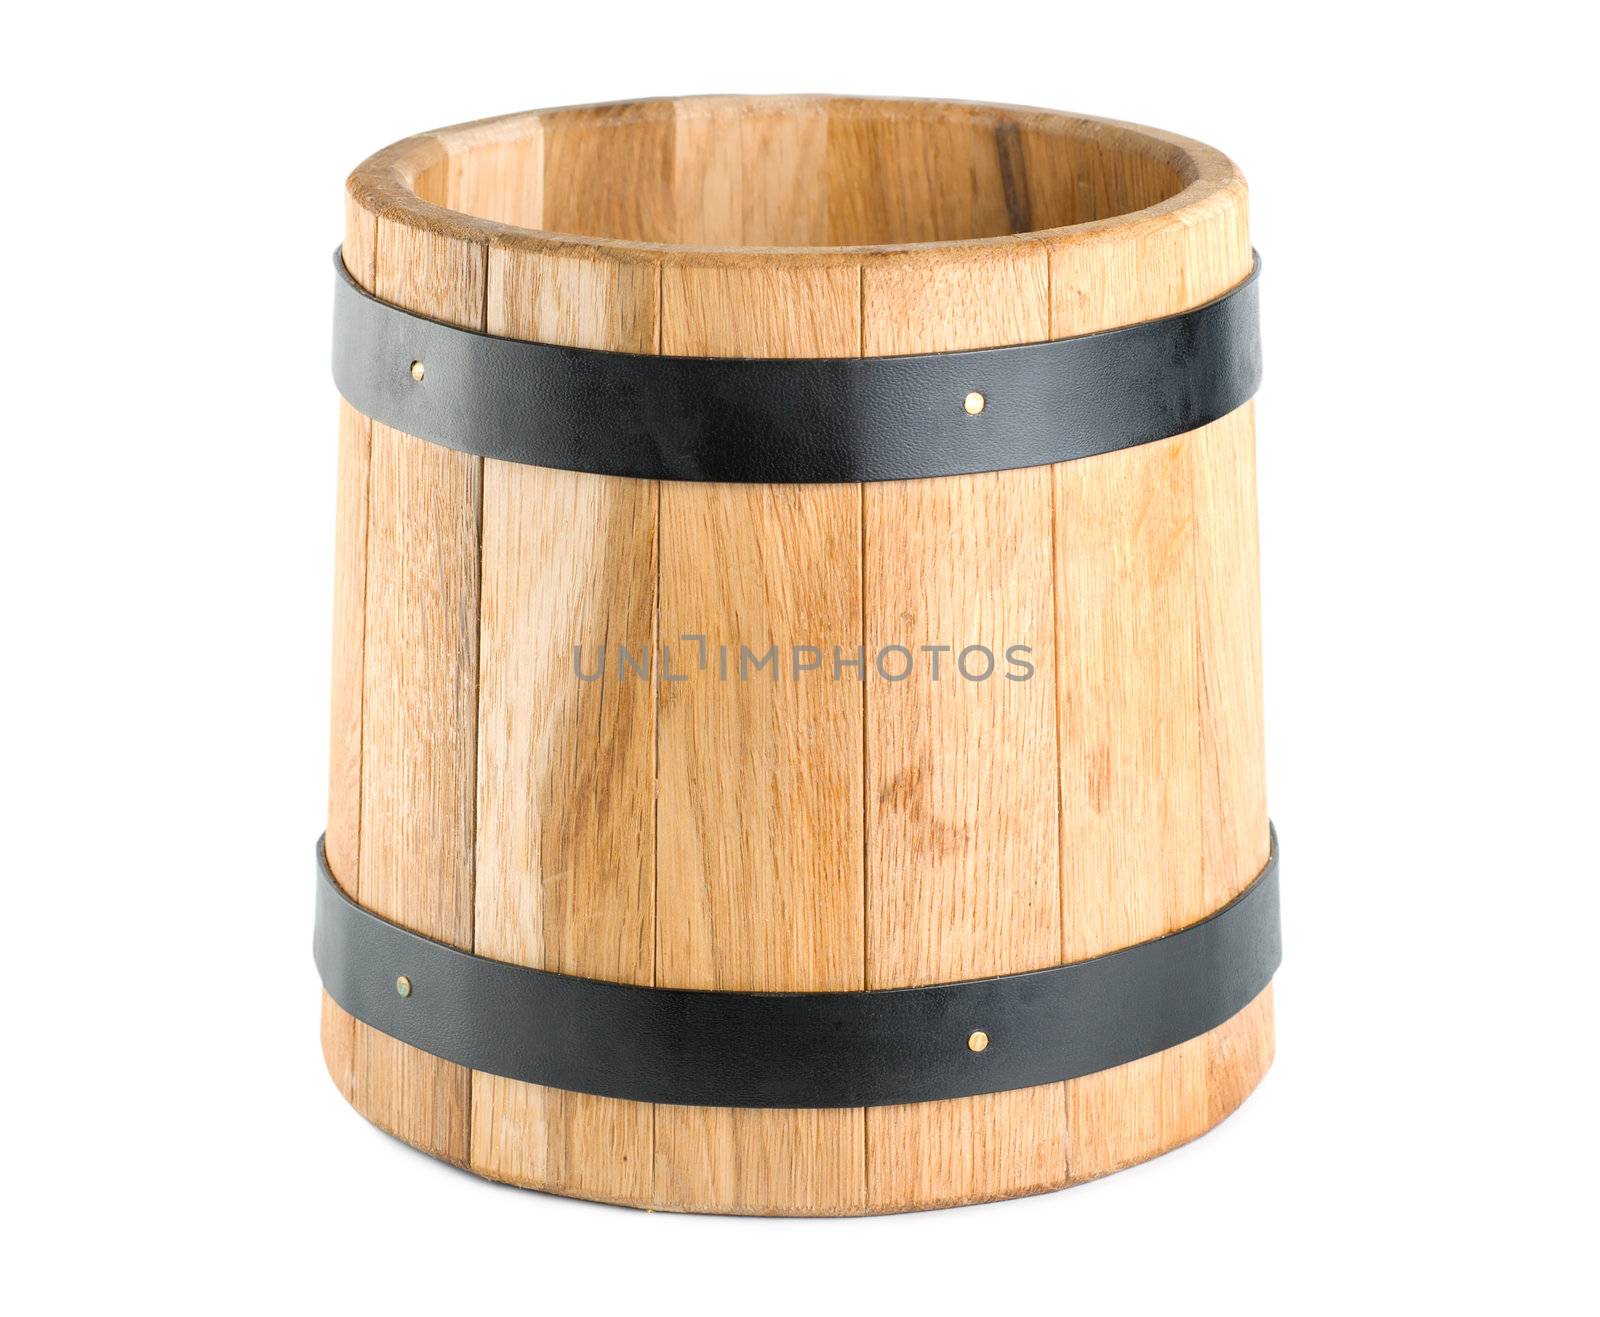 Wooden barrel by Givaga